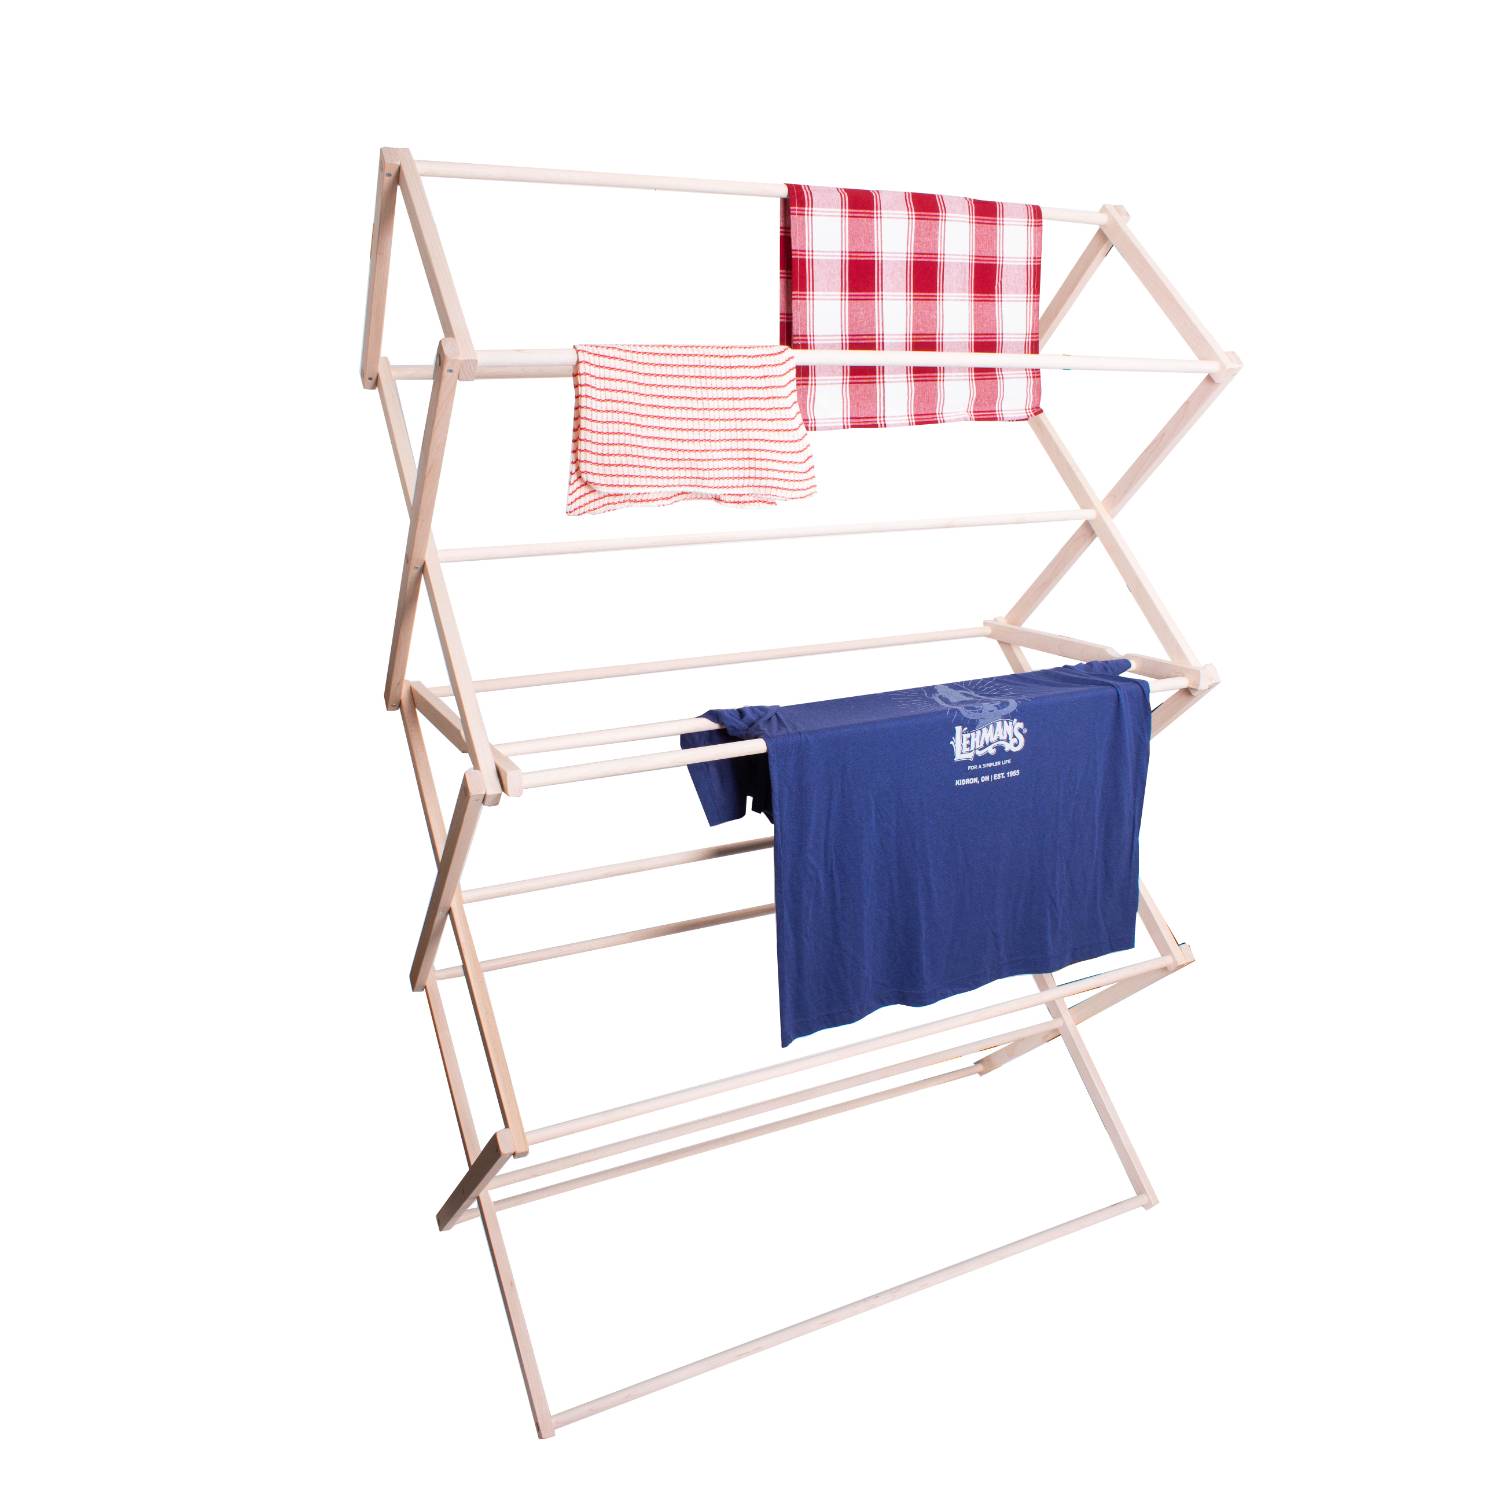 Wooden Clothes Drying Rack Large